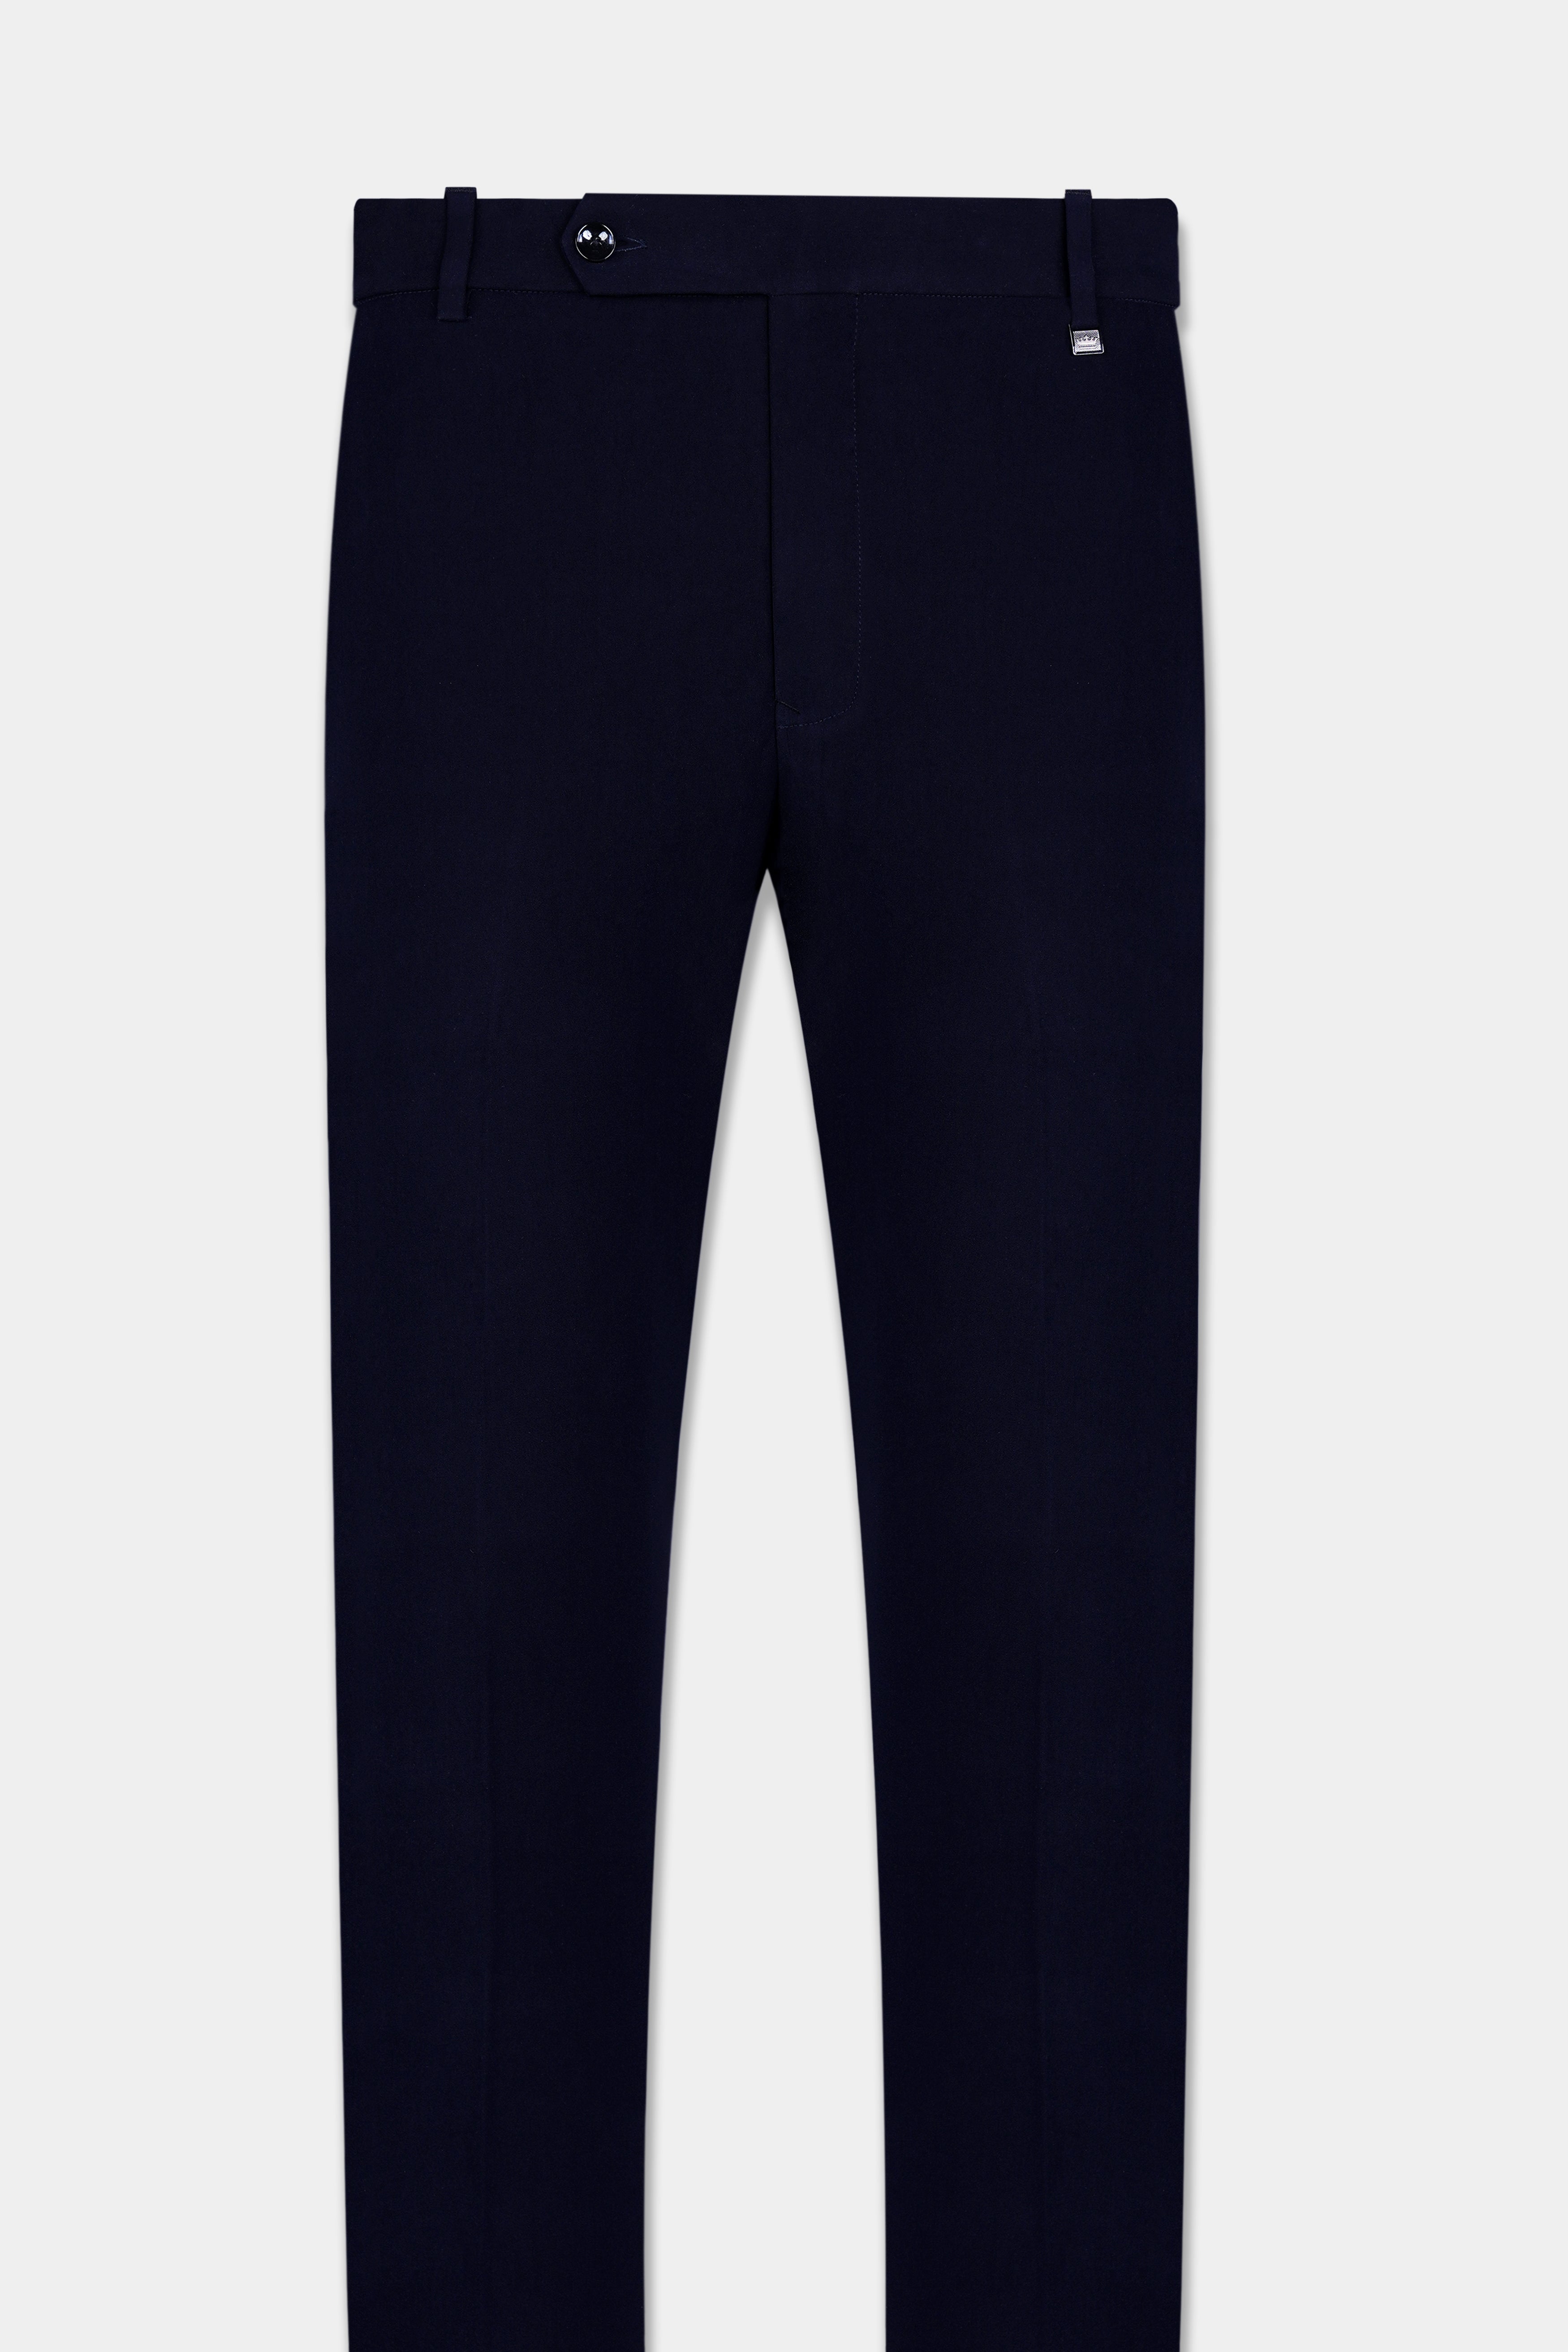 Korean Blue (The Best Blue We have) Wool Rich Stretchable Traveler Pant